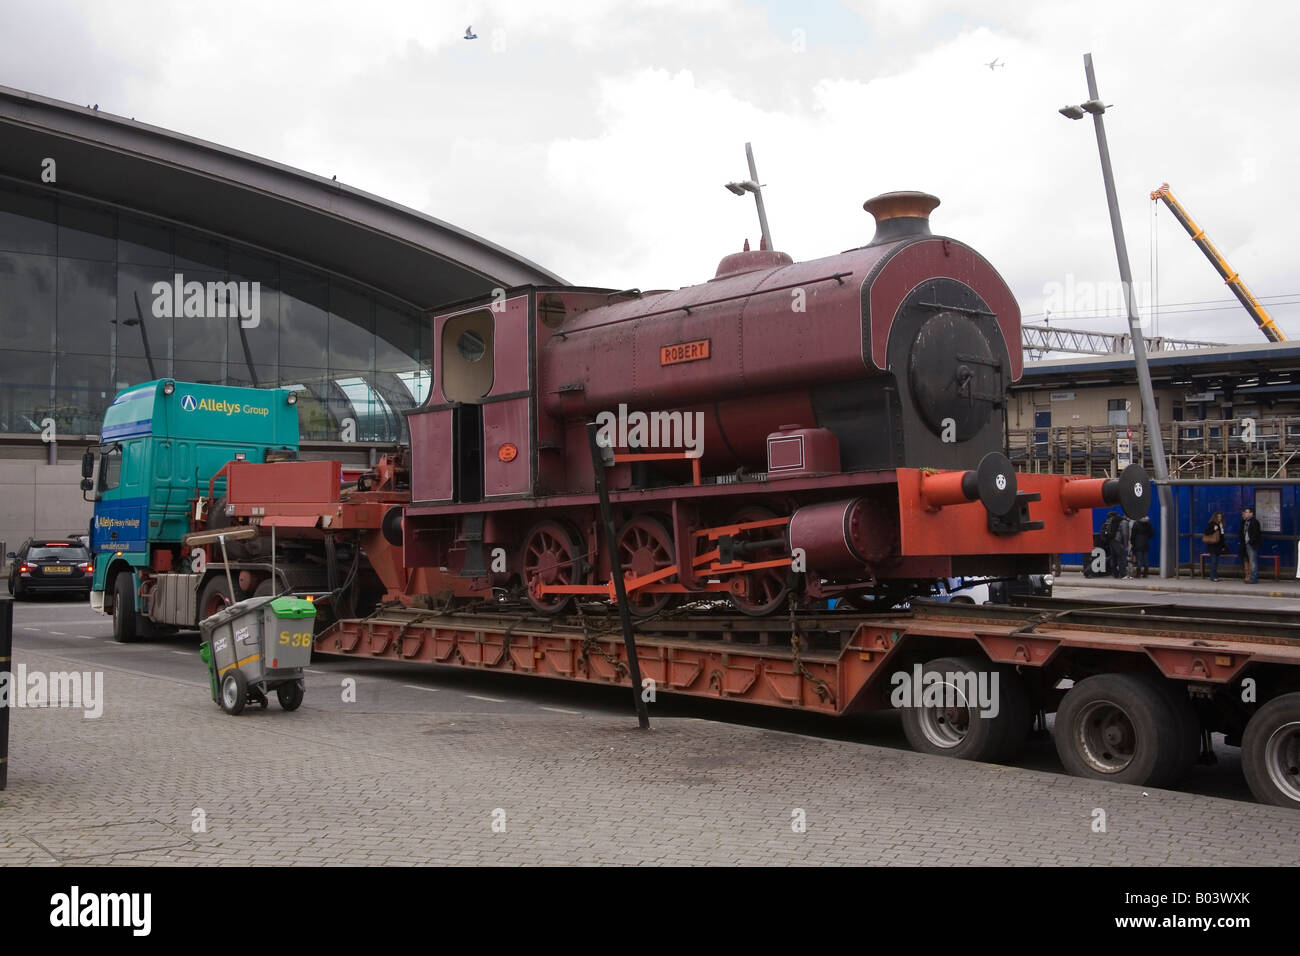 Robert the steam train being moved from Stratford station London, for renovation for the 2012 Olympic games. Stock Photo